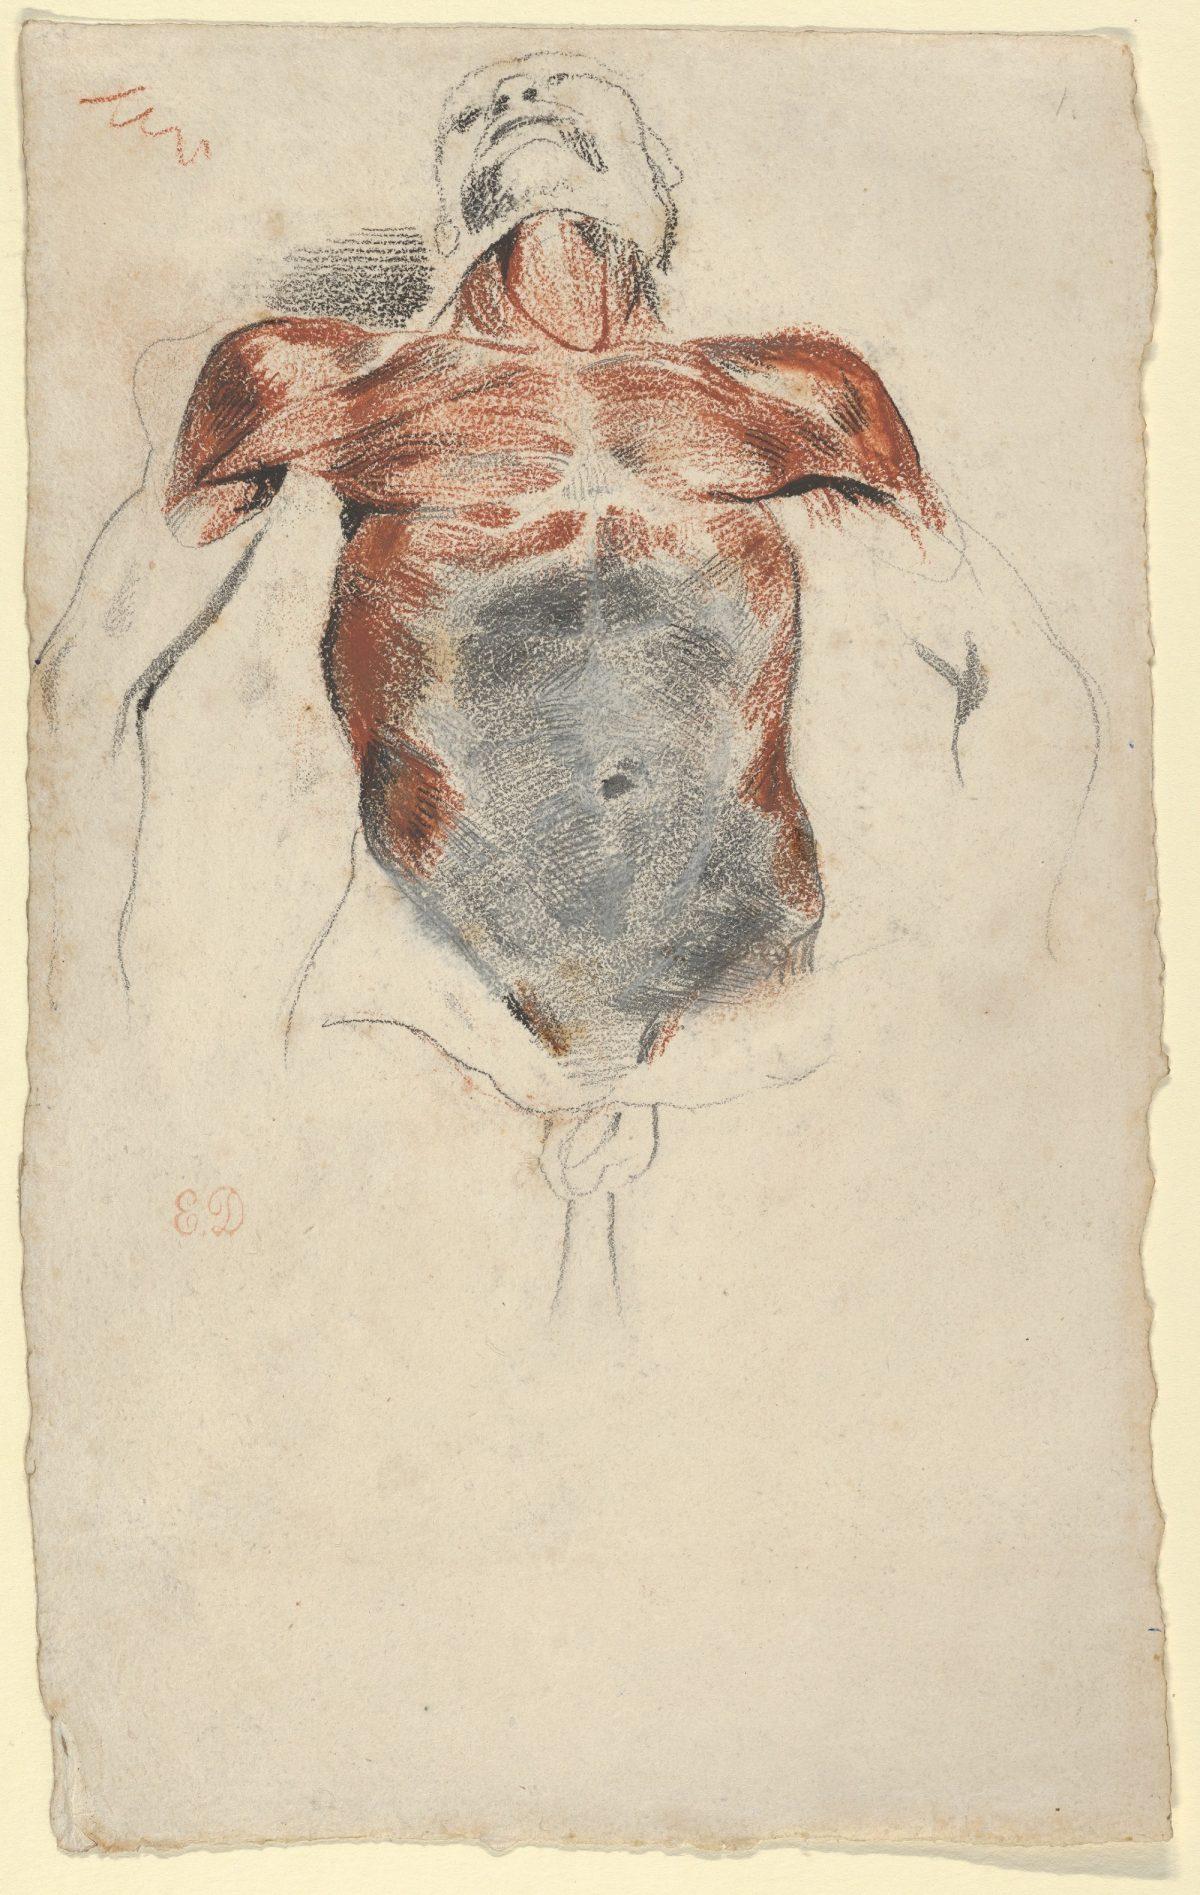 "Ecorché: Torso of a Male Cadaver," circa 1828, by Eugène Delacroix (1798–1863). Red, black, and white chalk, graphite, 9 15/16 inches by 6 1/4 inches. The Metropolitan Museum of Art, a gift from the Karen B. Cohen Collection of Eugène Delacroix, in honor of William M. Griswold, 2013. (The Metropolitan Museum of Art)